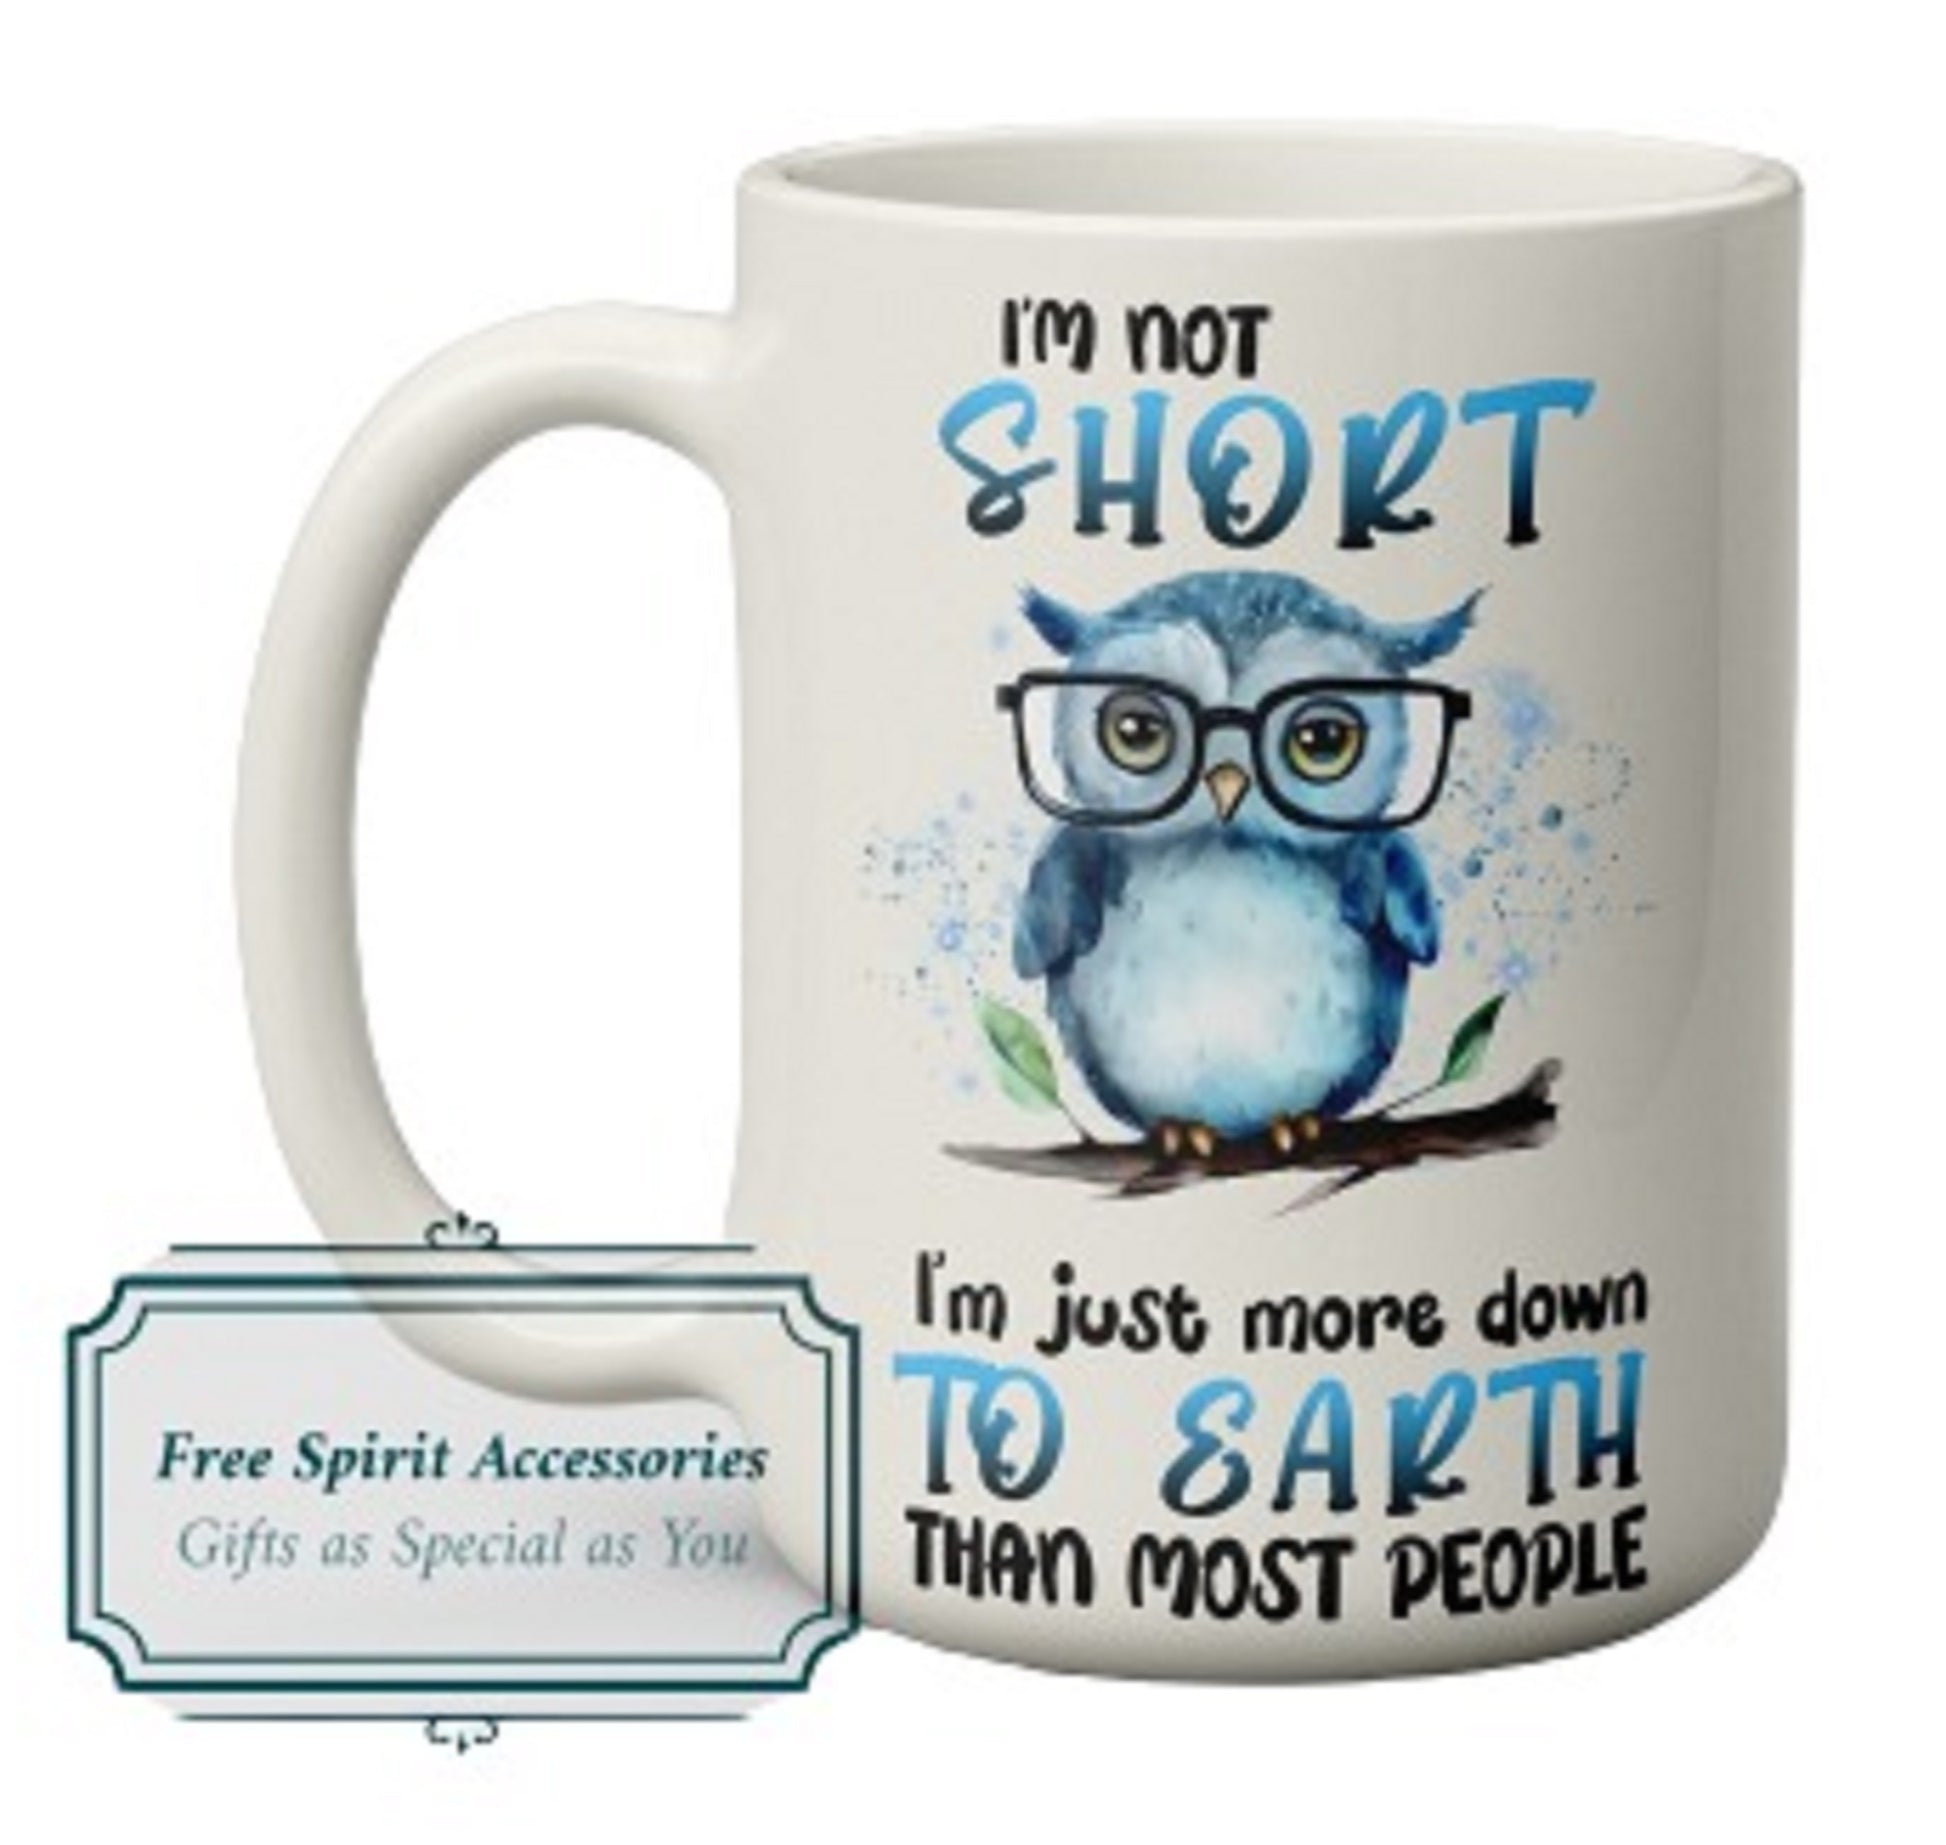  Funny I'm Not Short I'm More Down To Earth Mug by Free Spirit Accessories sold by Free Spirit Accessories